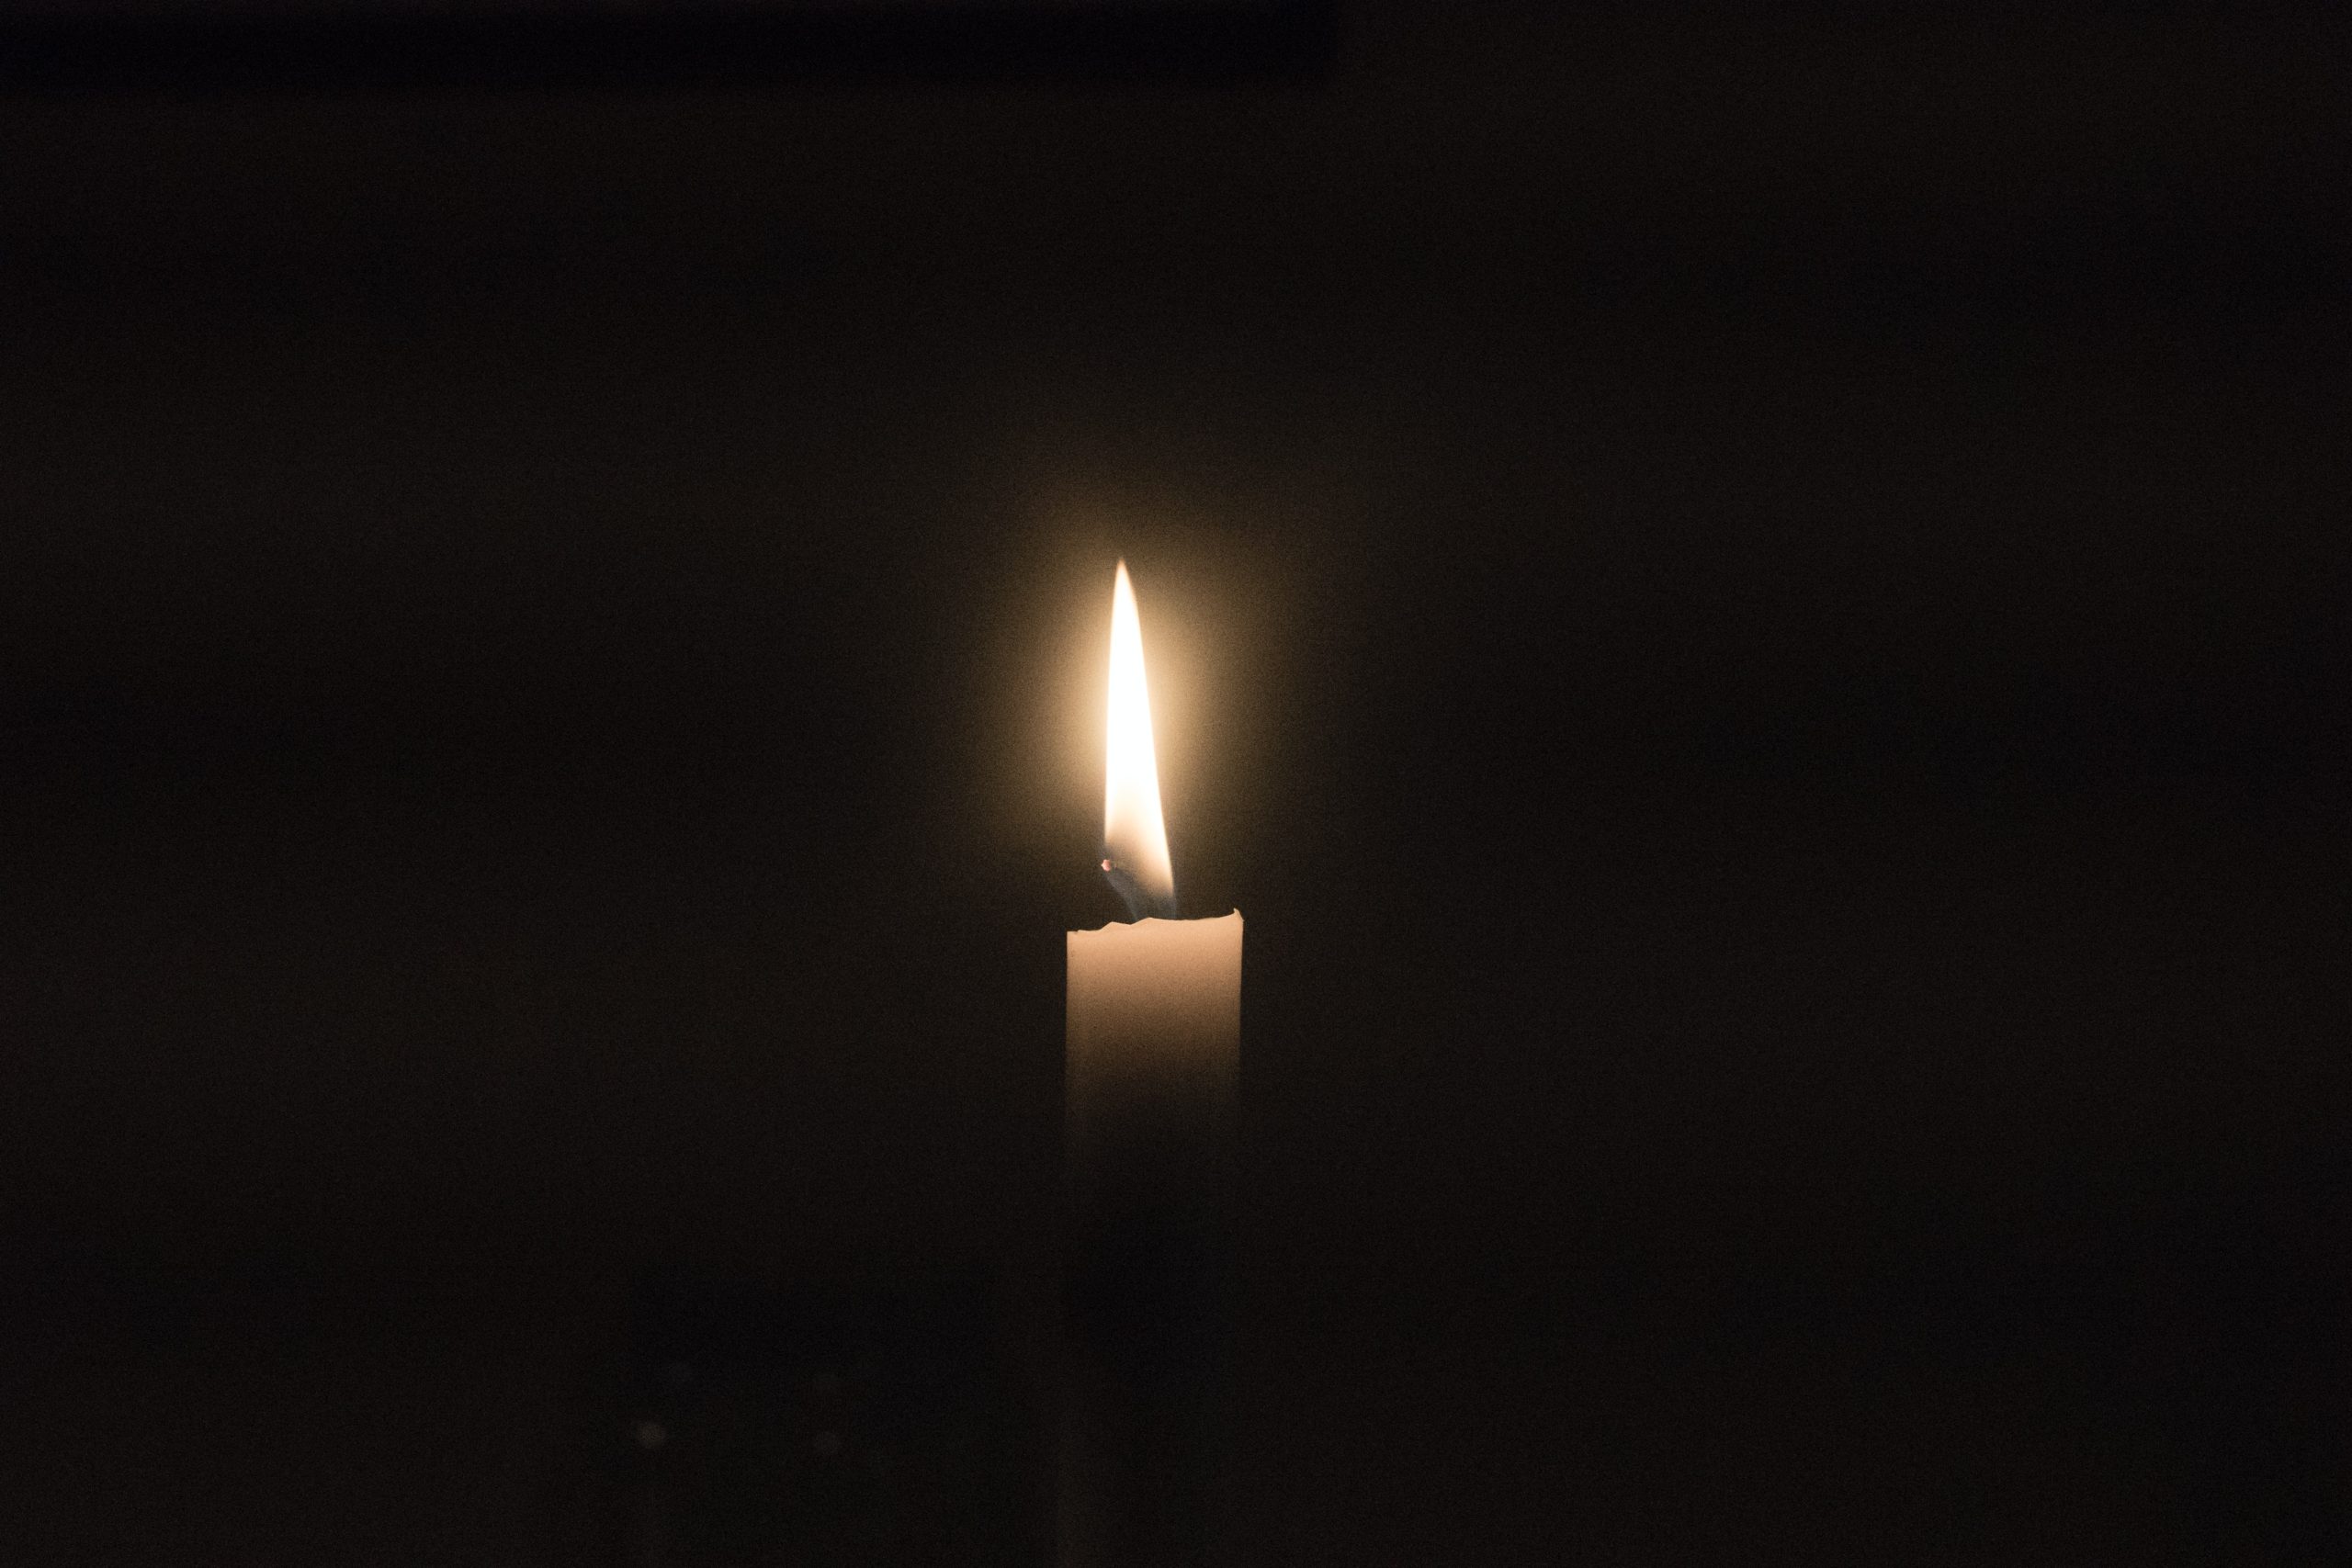 Candlelight candle flame Photo by Jarl Schmidt on Unsplash